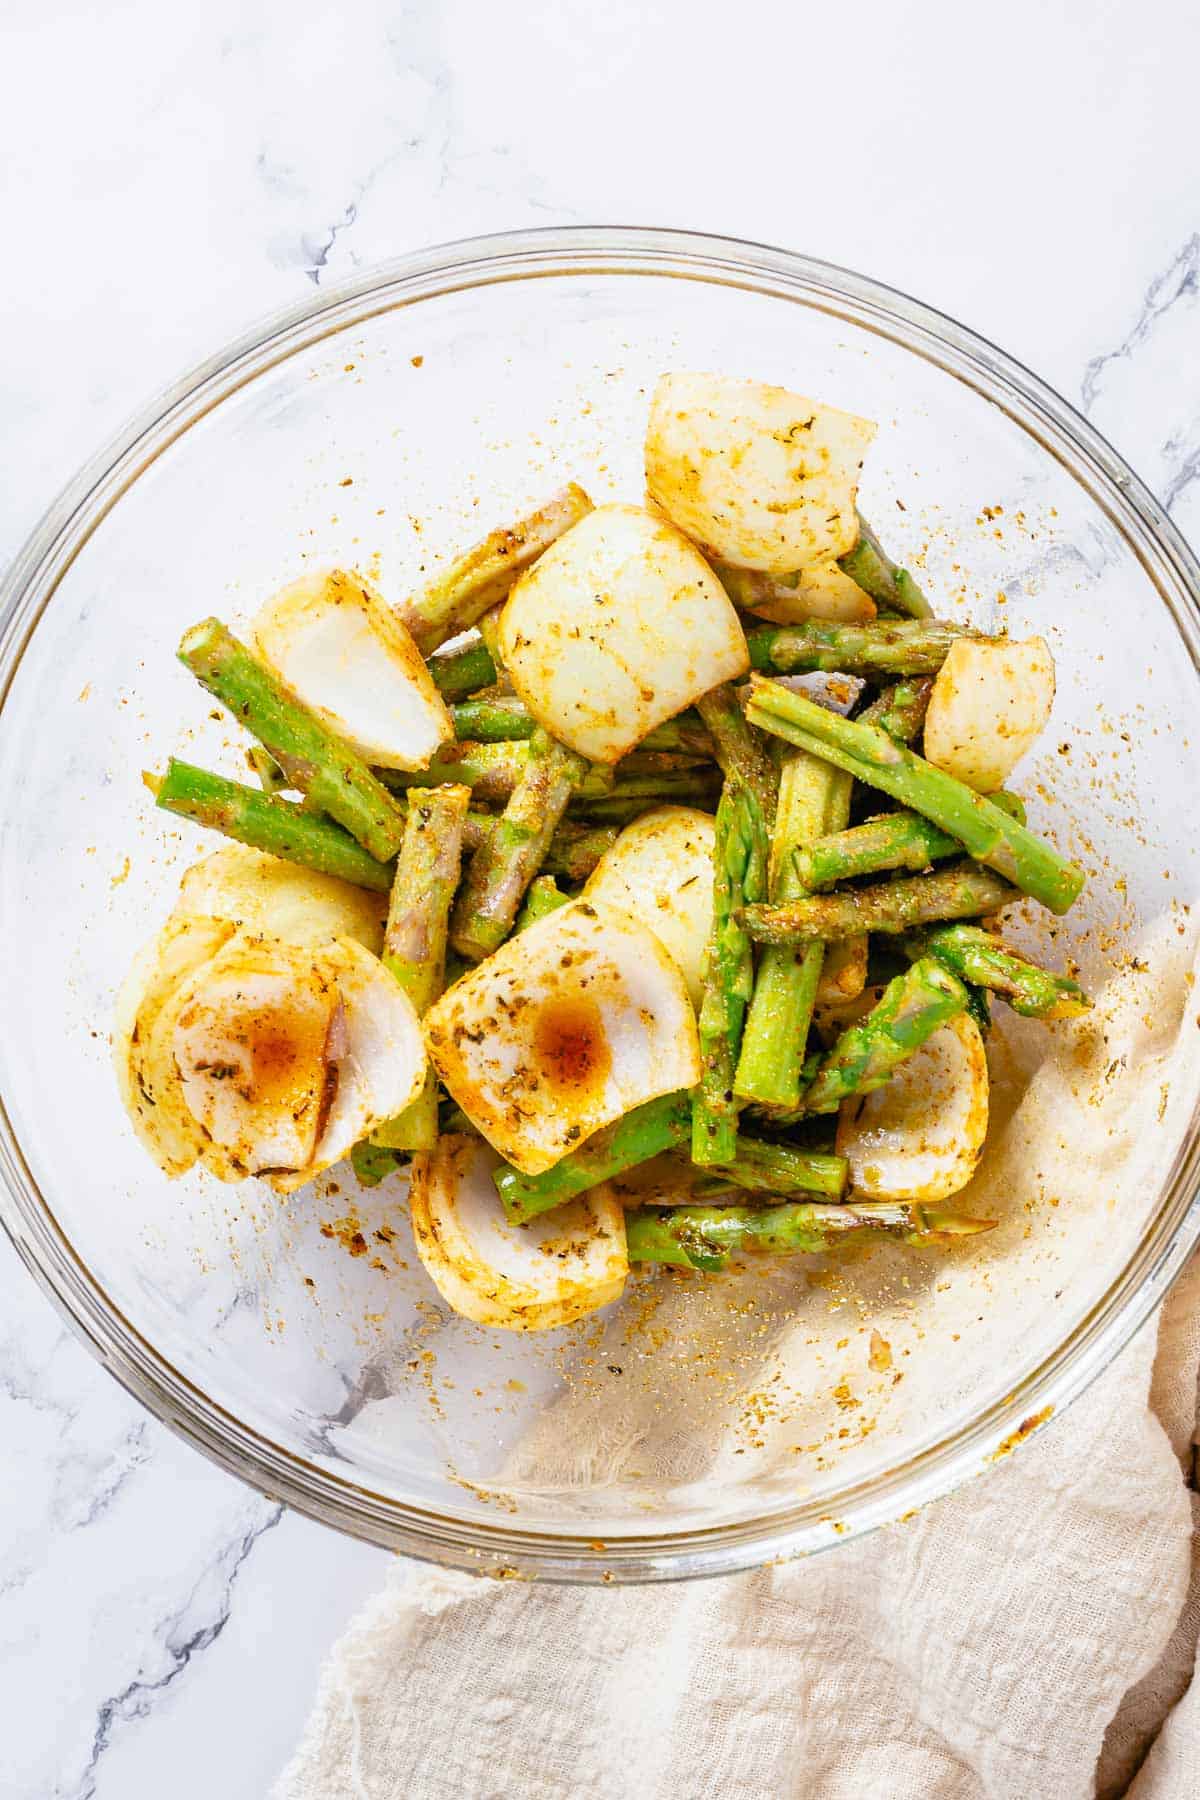 onions and asparagus drizzled with marinade